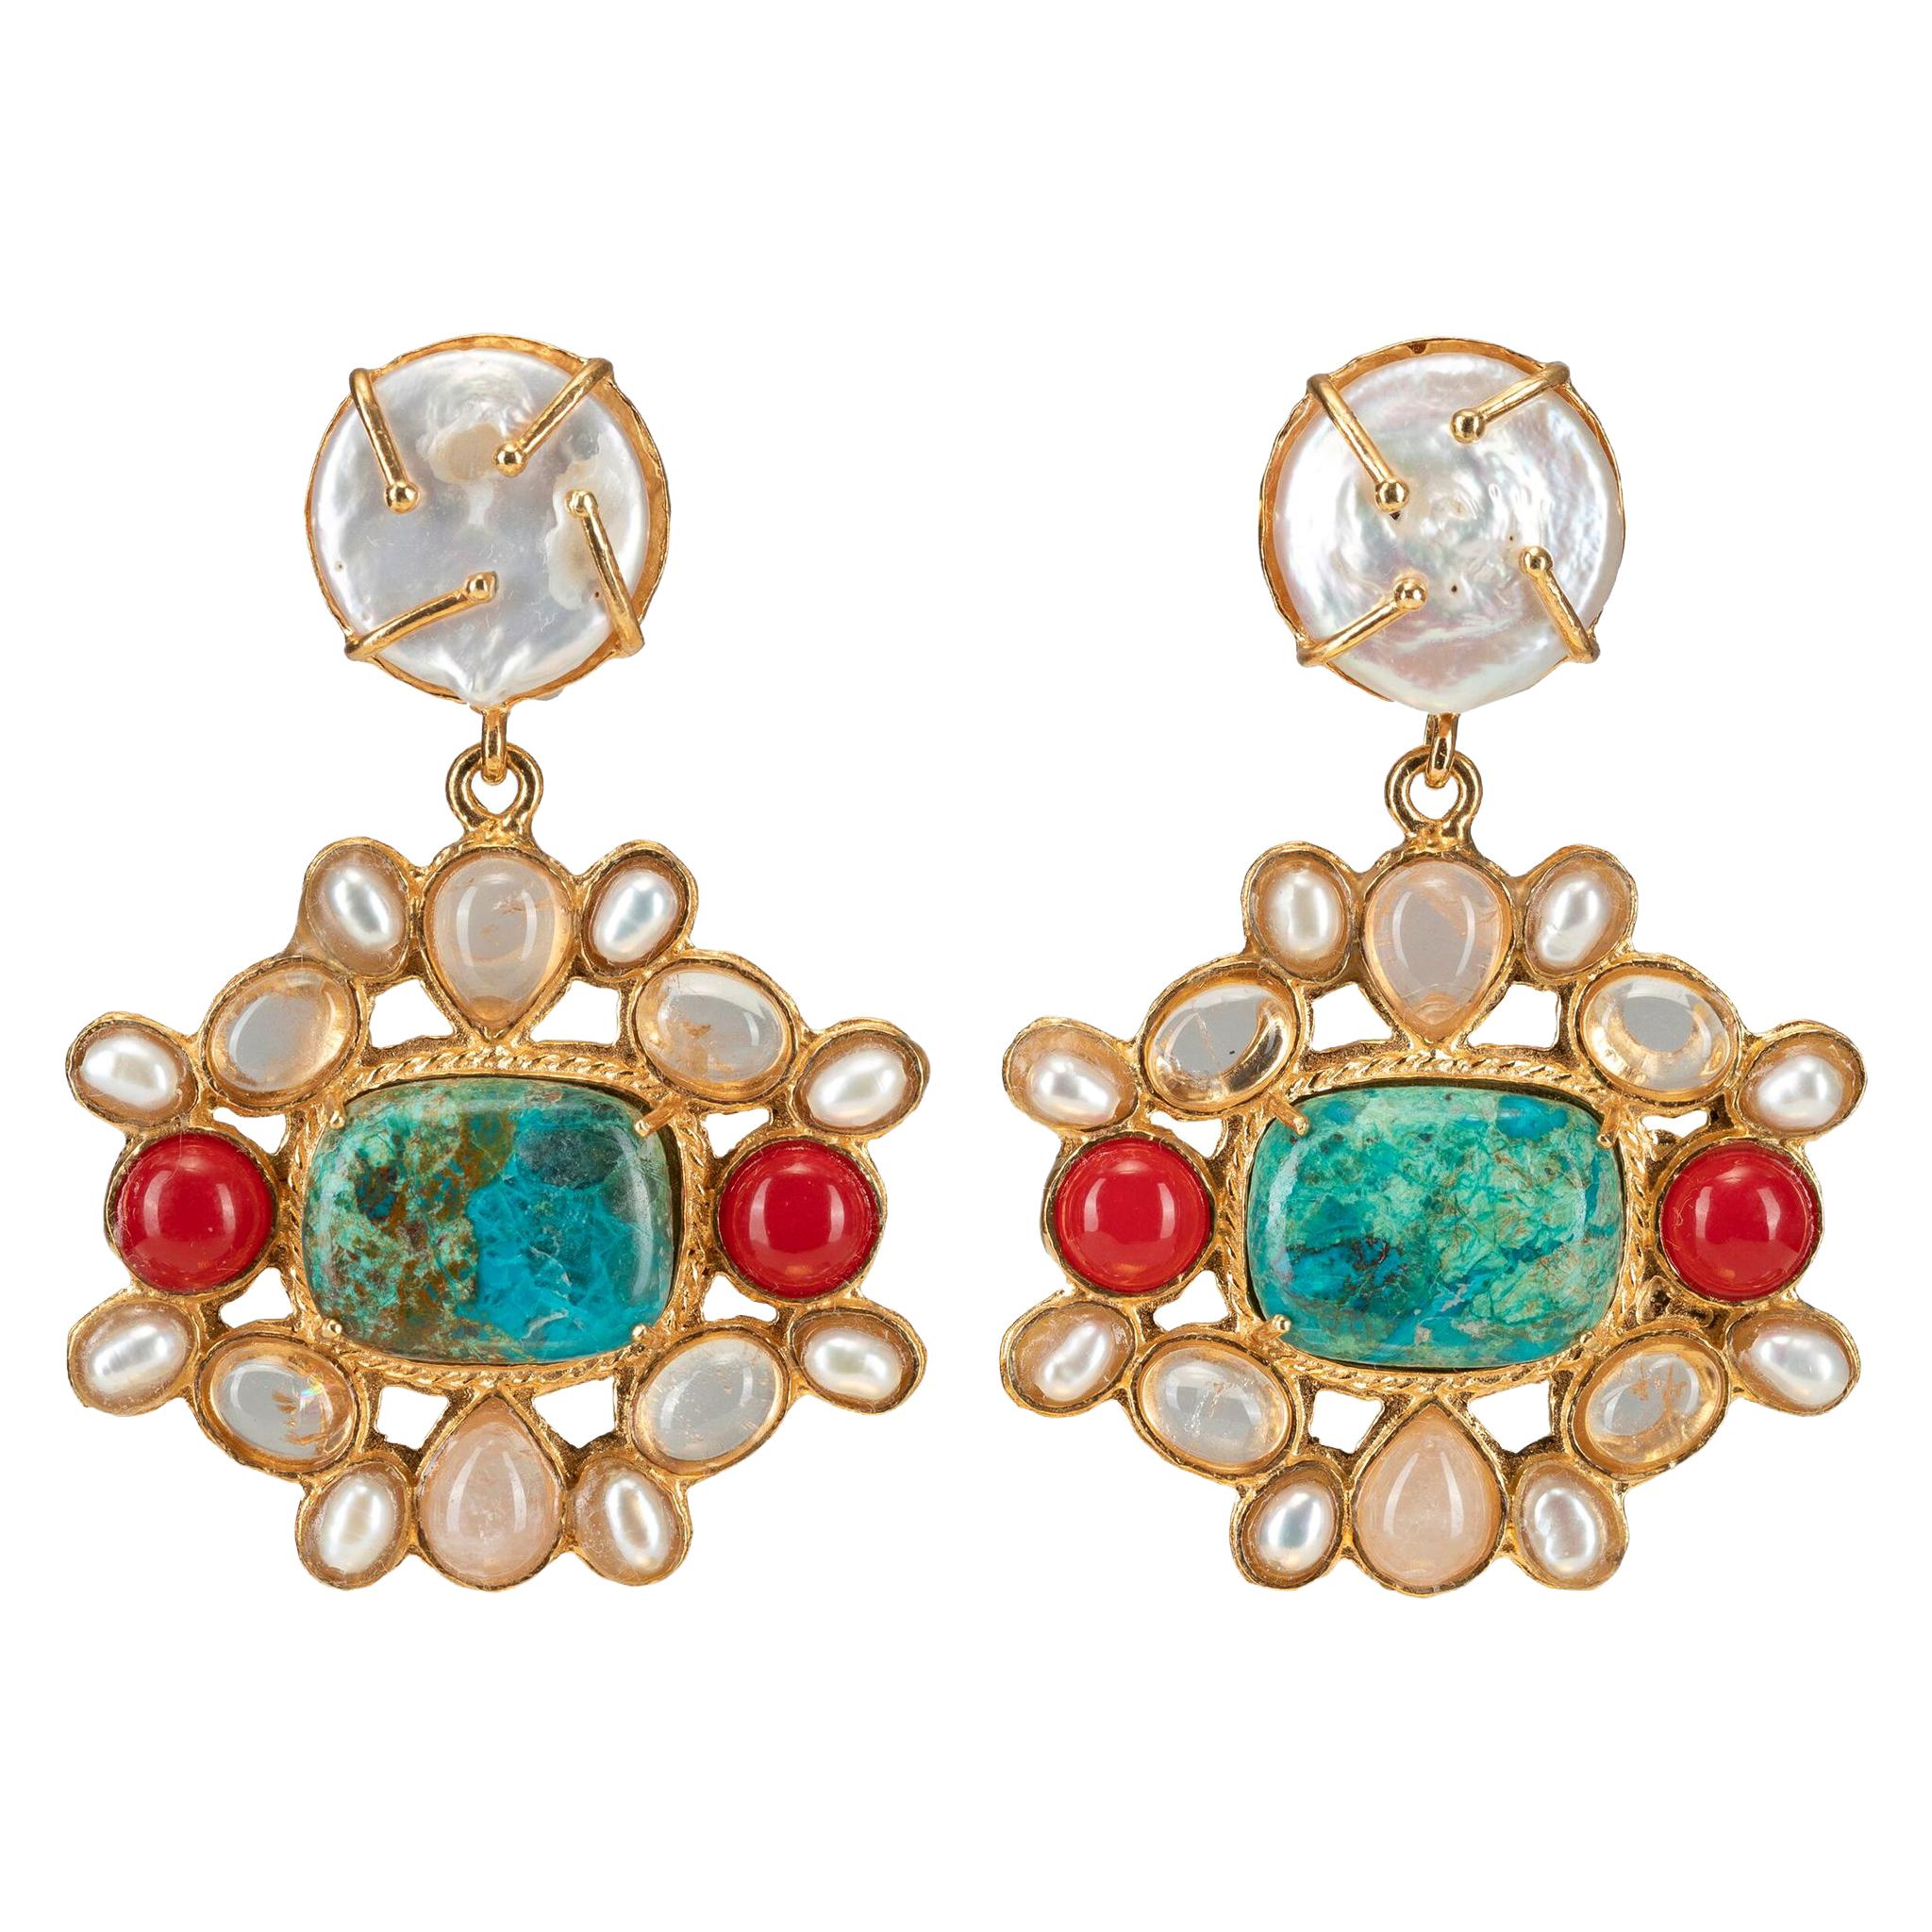 Christie Nicolaides Earrings in Turquoise like Chrysocolla, Ros Quartz & Pearl